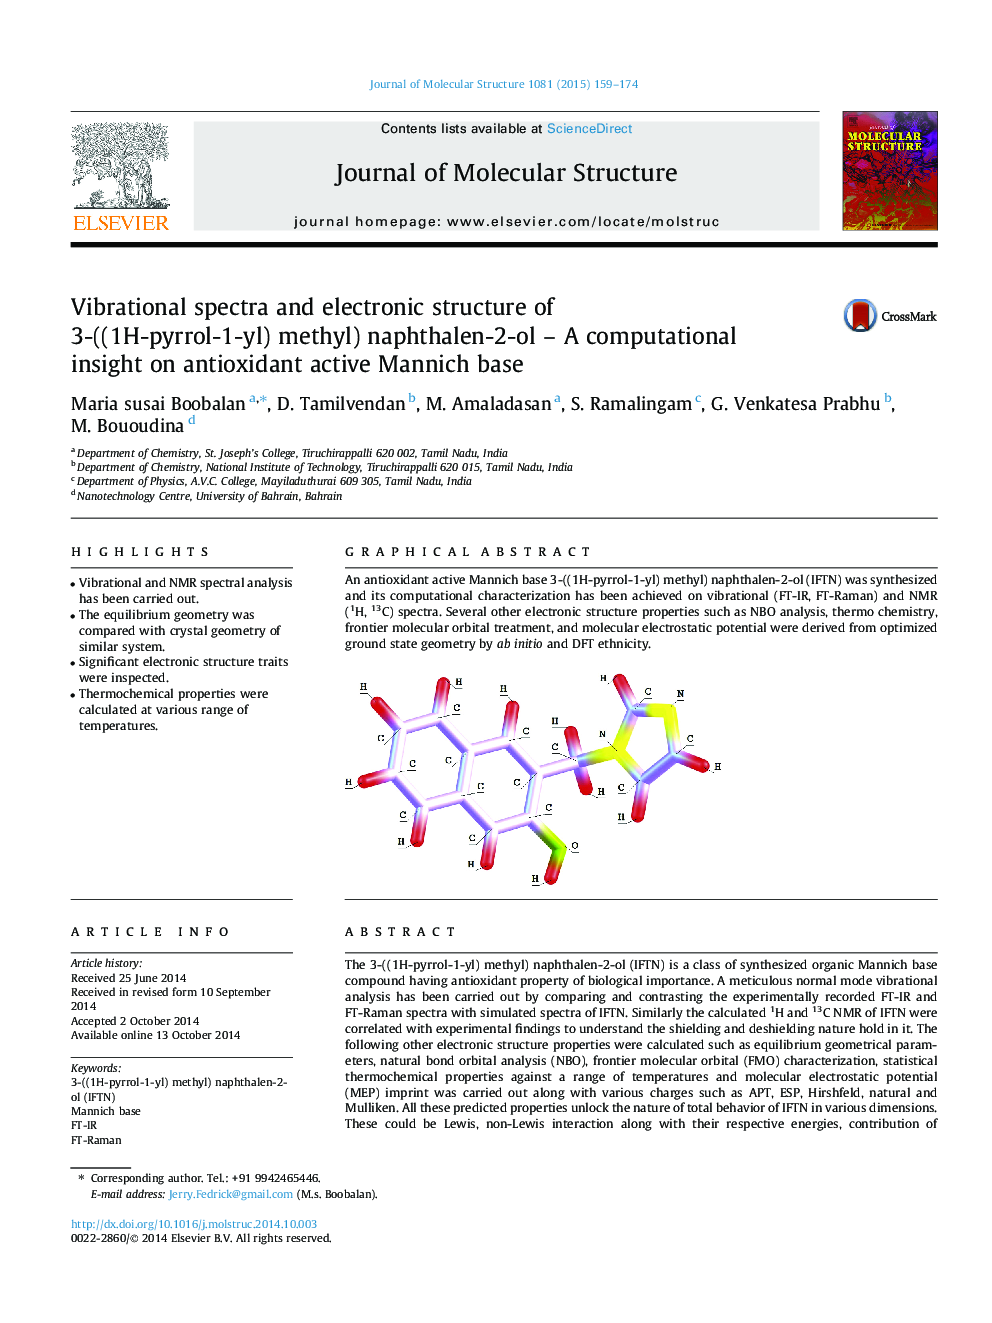 Vibrational spectra and electronic structure of 3-((1H-pyrrol-1-yl) methyl) naphthalen-2-ol – A computational insight on antioxidant active Mannich base